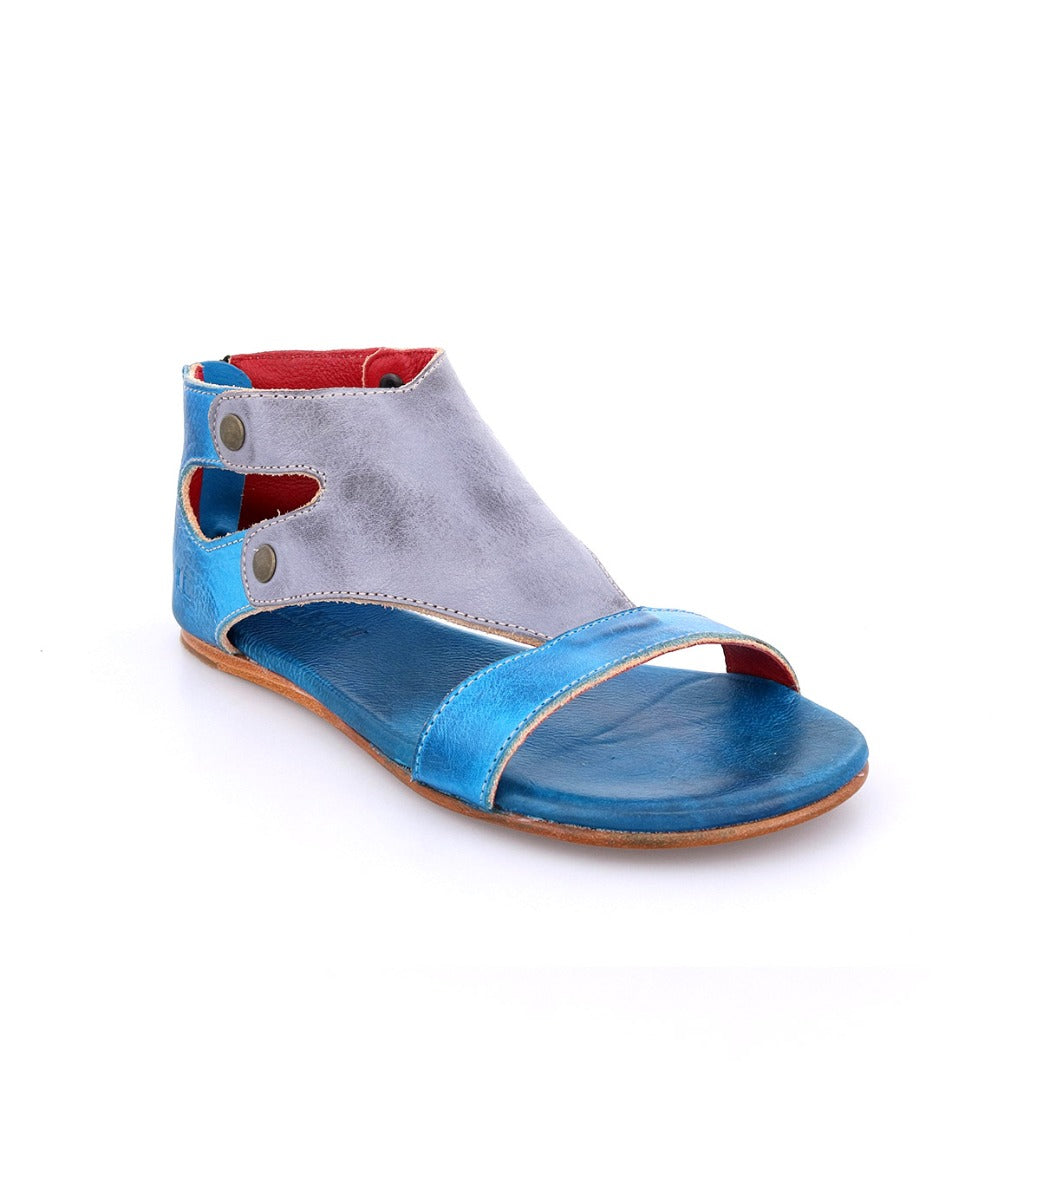 A women's blue and grey Bed Stu Soto sandal with two straps.